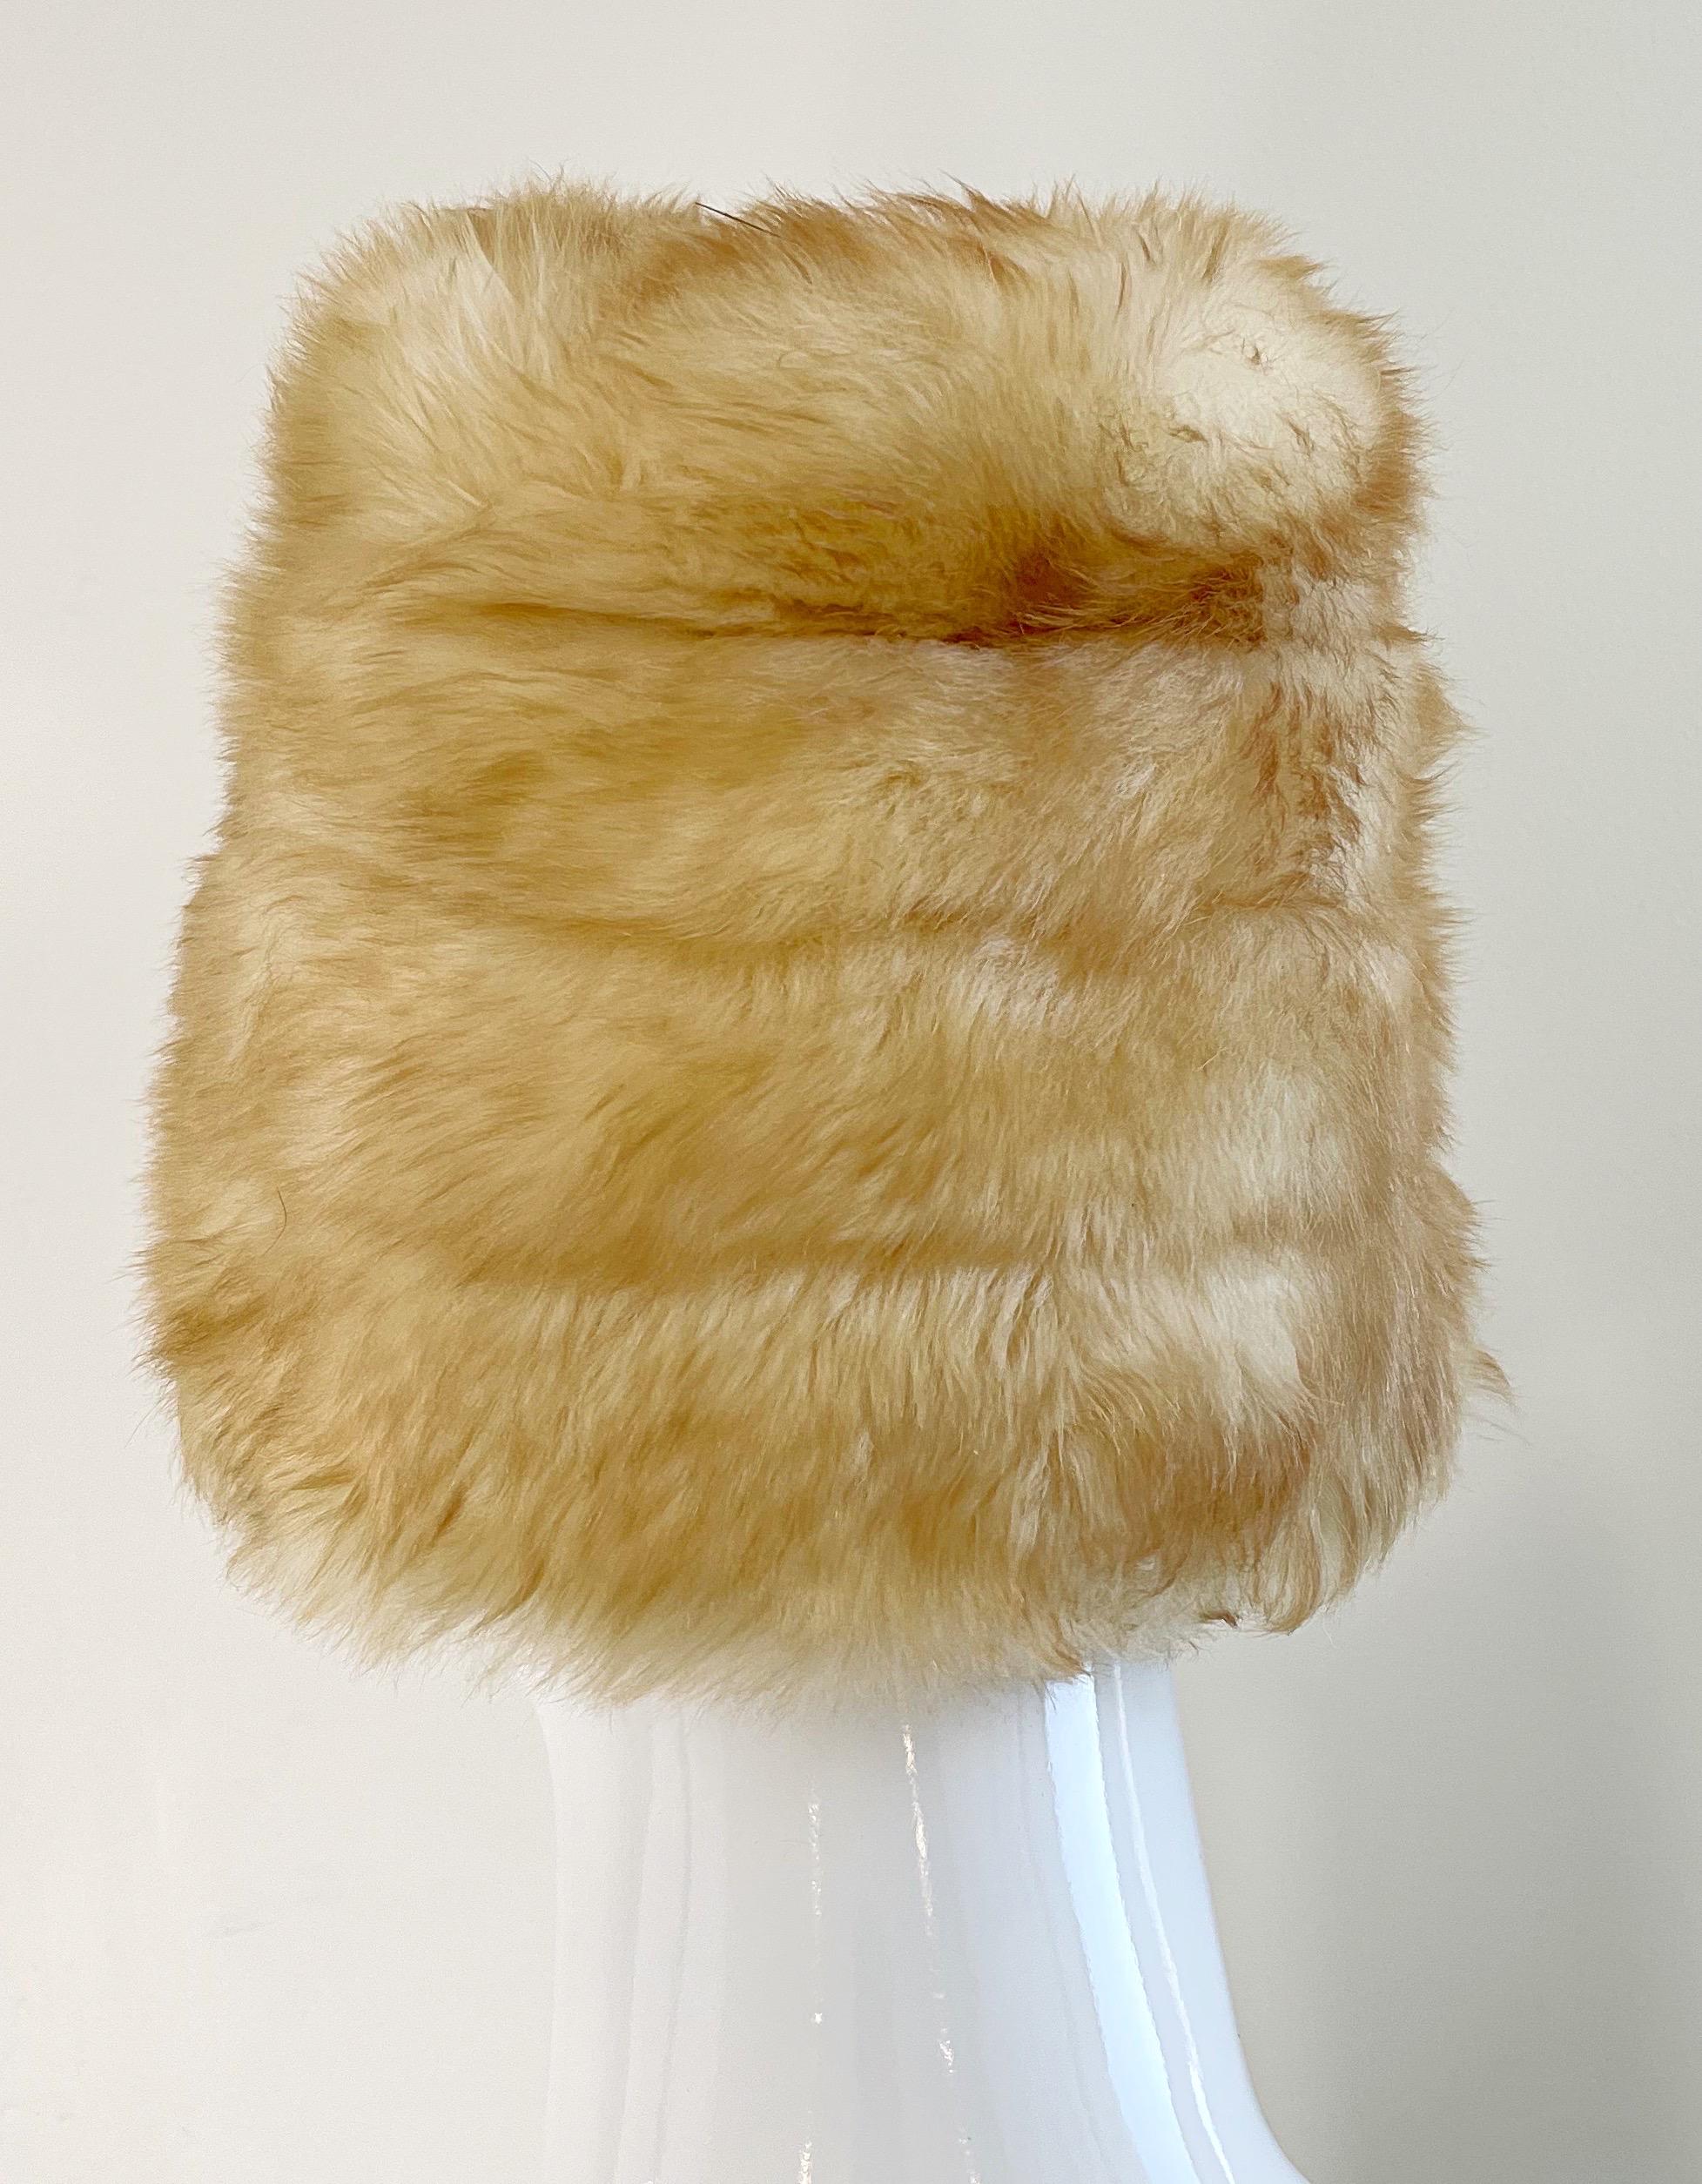 Yves Saint Laurent Fall 1976 Russian Collection Shearling Honey Tan Fur Hat 70s 2